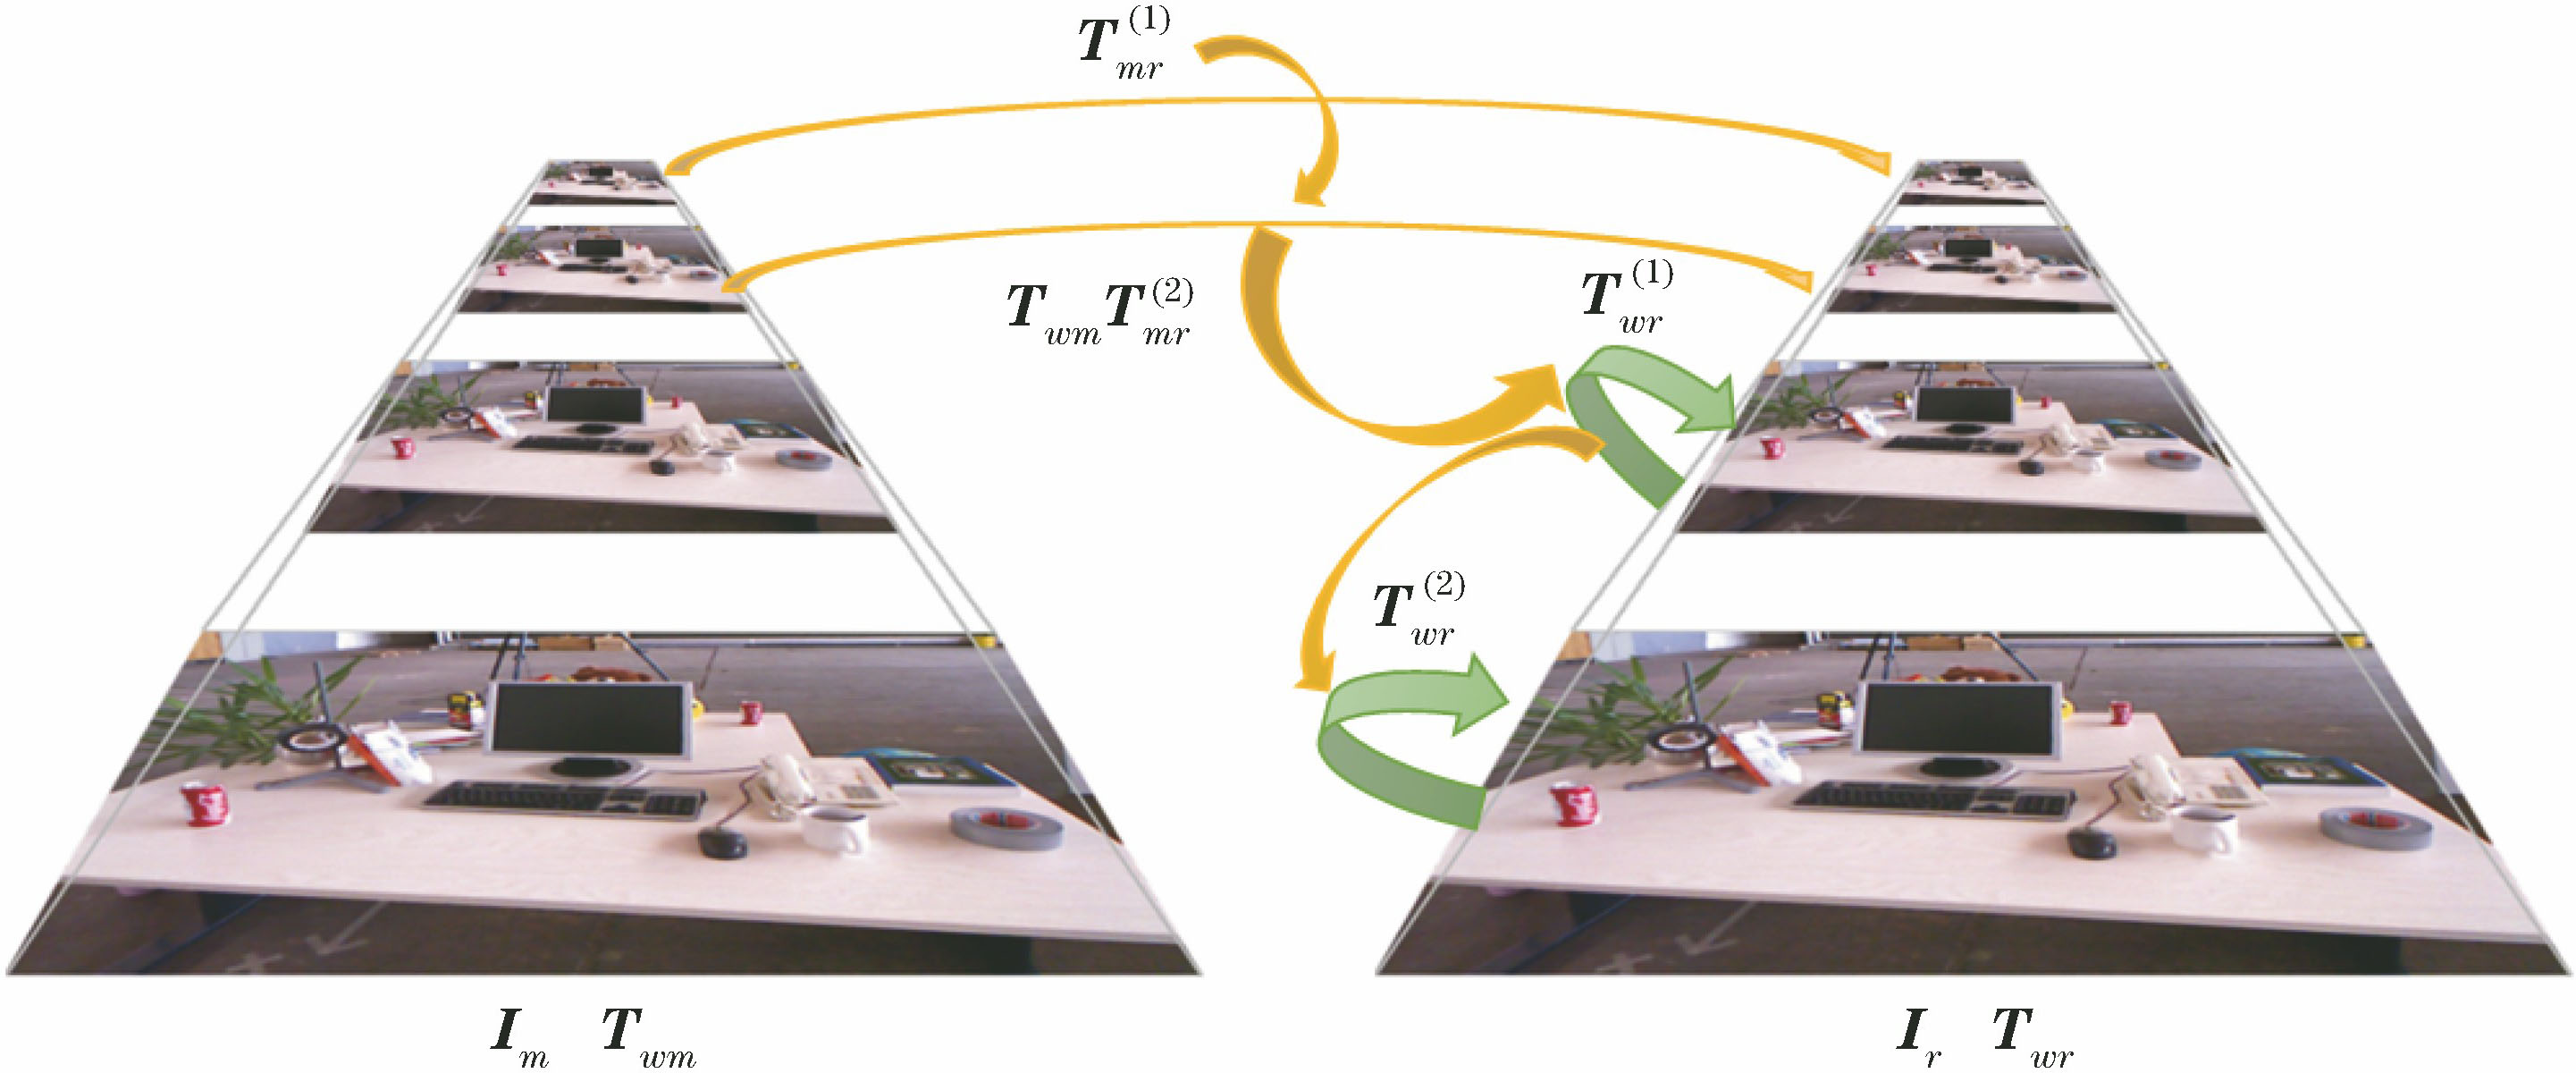 Schematic of four-layer image pyramid model and improved camera pose estimation process